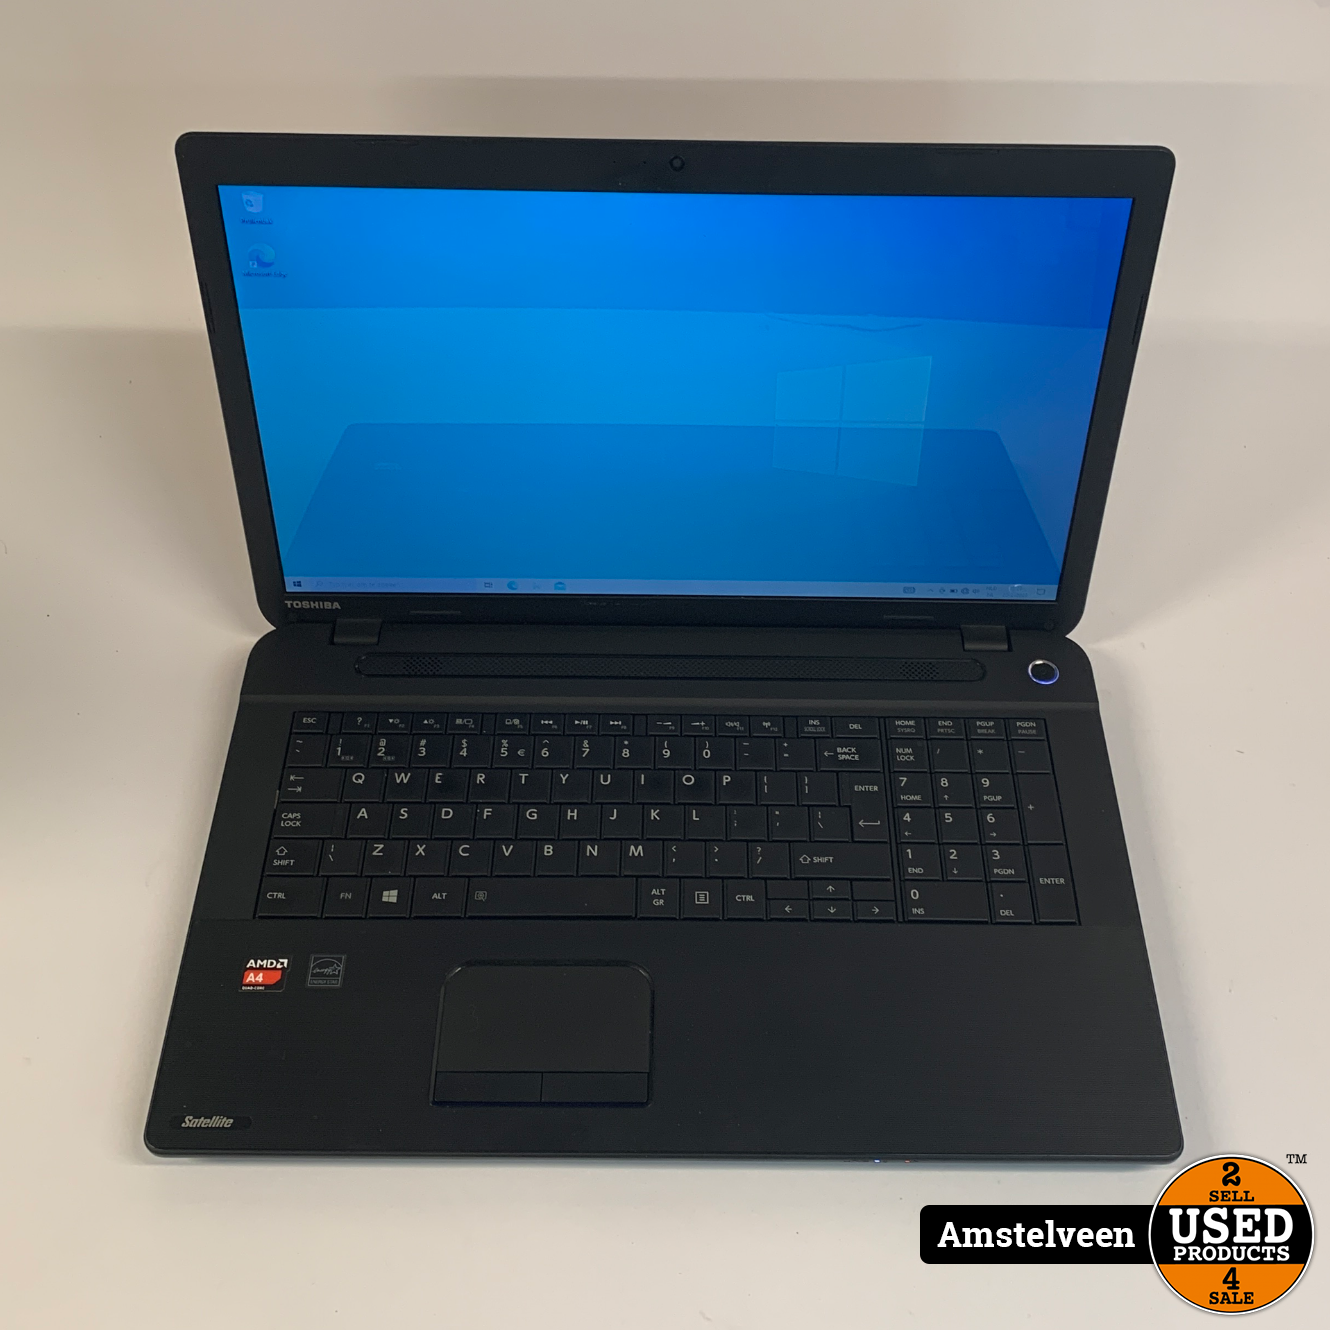 stroomkring Medaille mineraal Toshiba Satellite 17-inch Laptop | 4GB 230GB HDD | Nette Staat - Used  Products Amstelveen